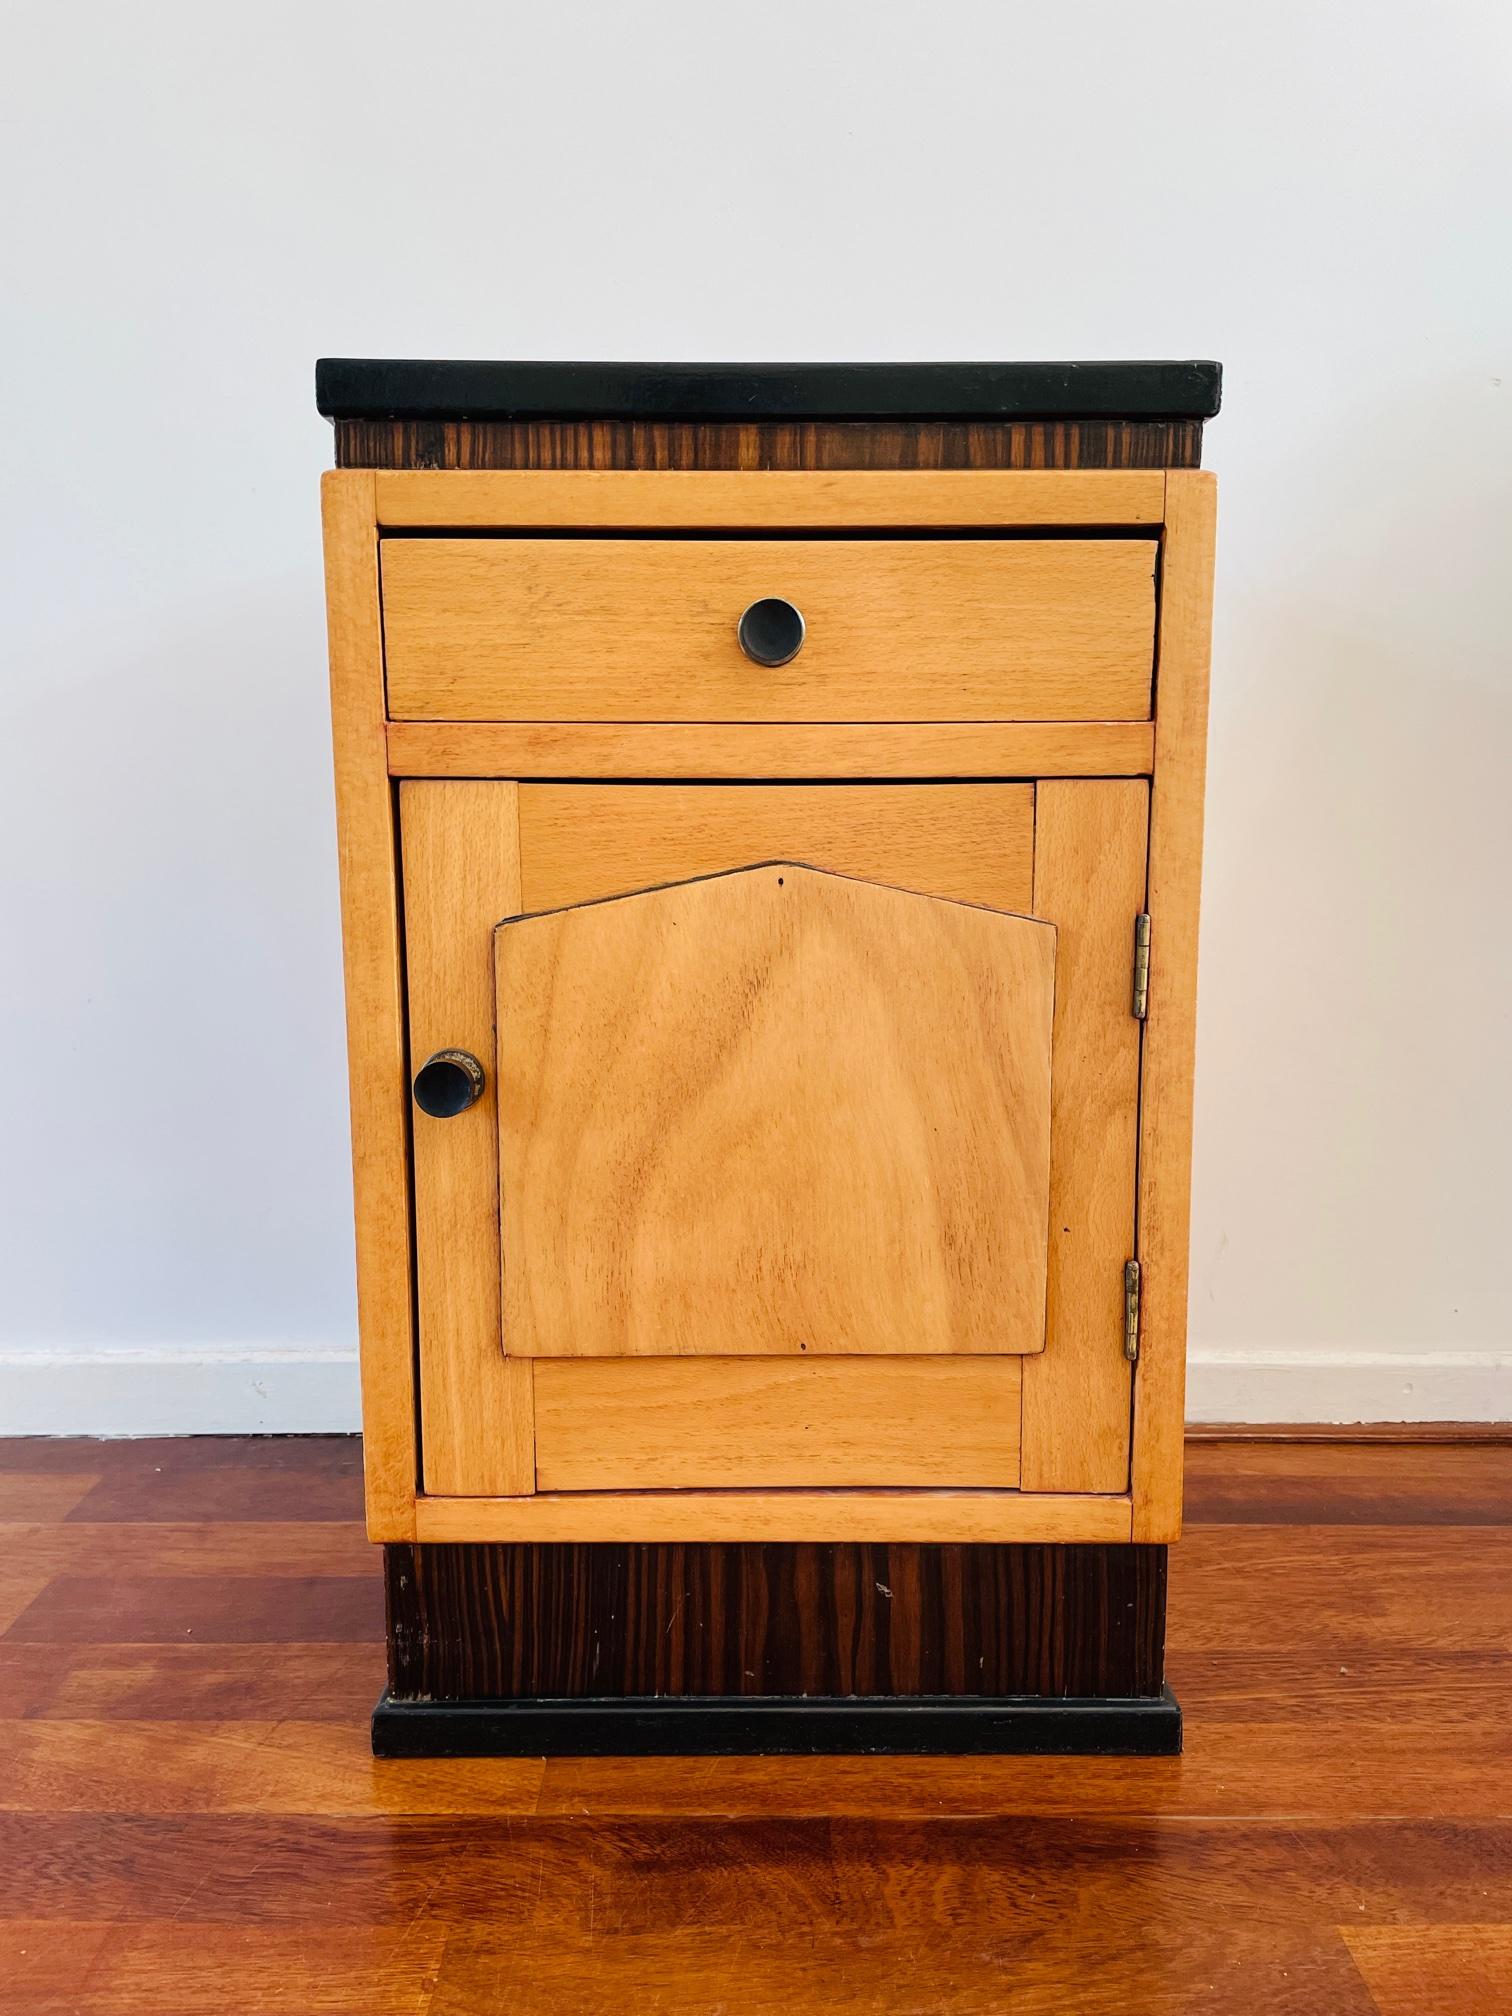 What a beautiful item. This cabinet is an eclectic piece of furniture. This small cabinet is made of different types of wood and is a beautiful mix of Art Deco and a sort of regency style. Absolutely great looking with the combination of black and